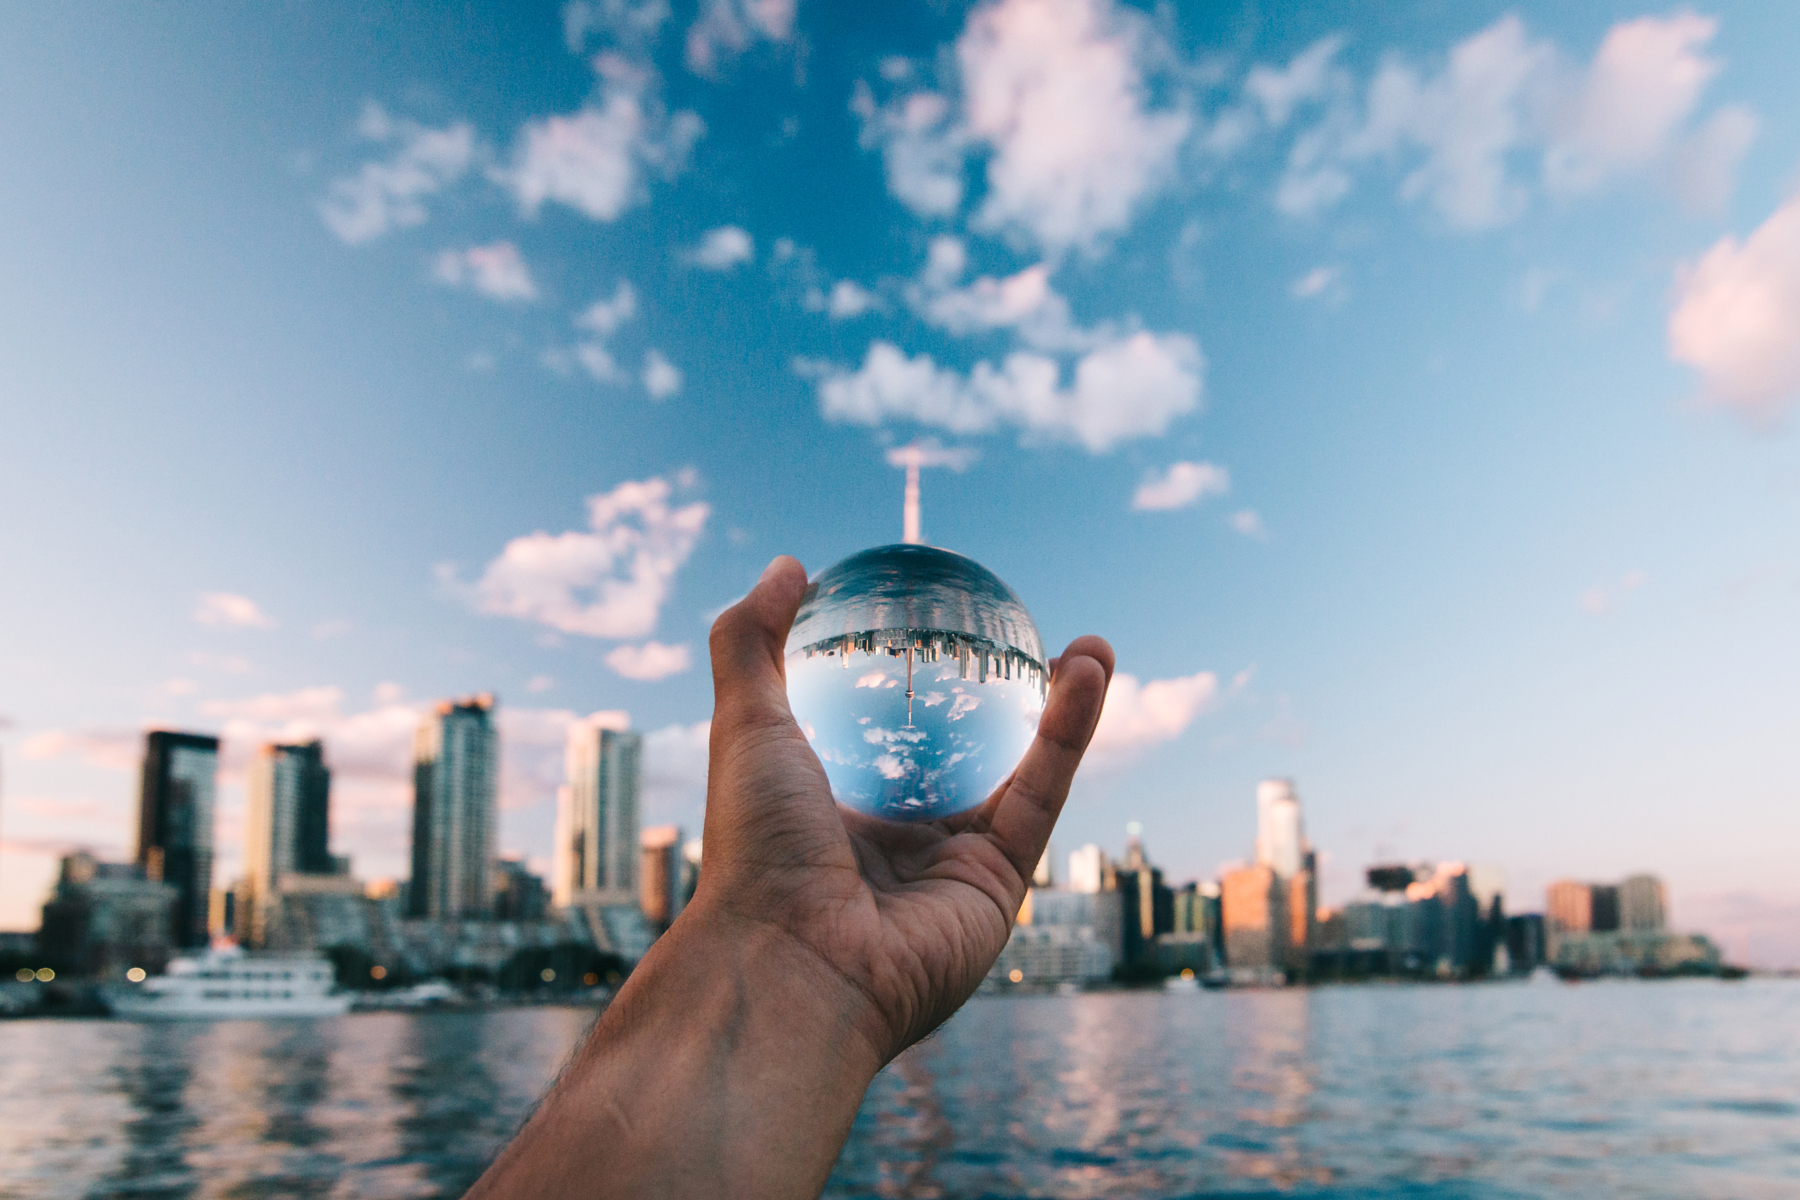 hand holding a crystal ball towards the harbour in daylight, with reflection of the landscape in it